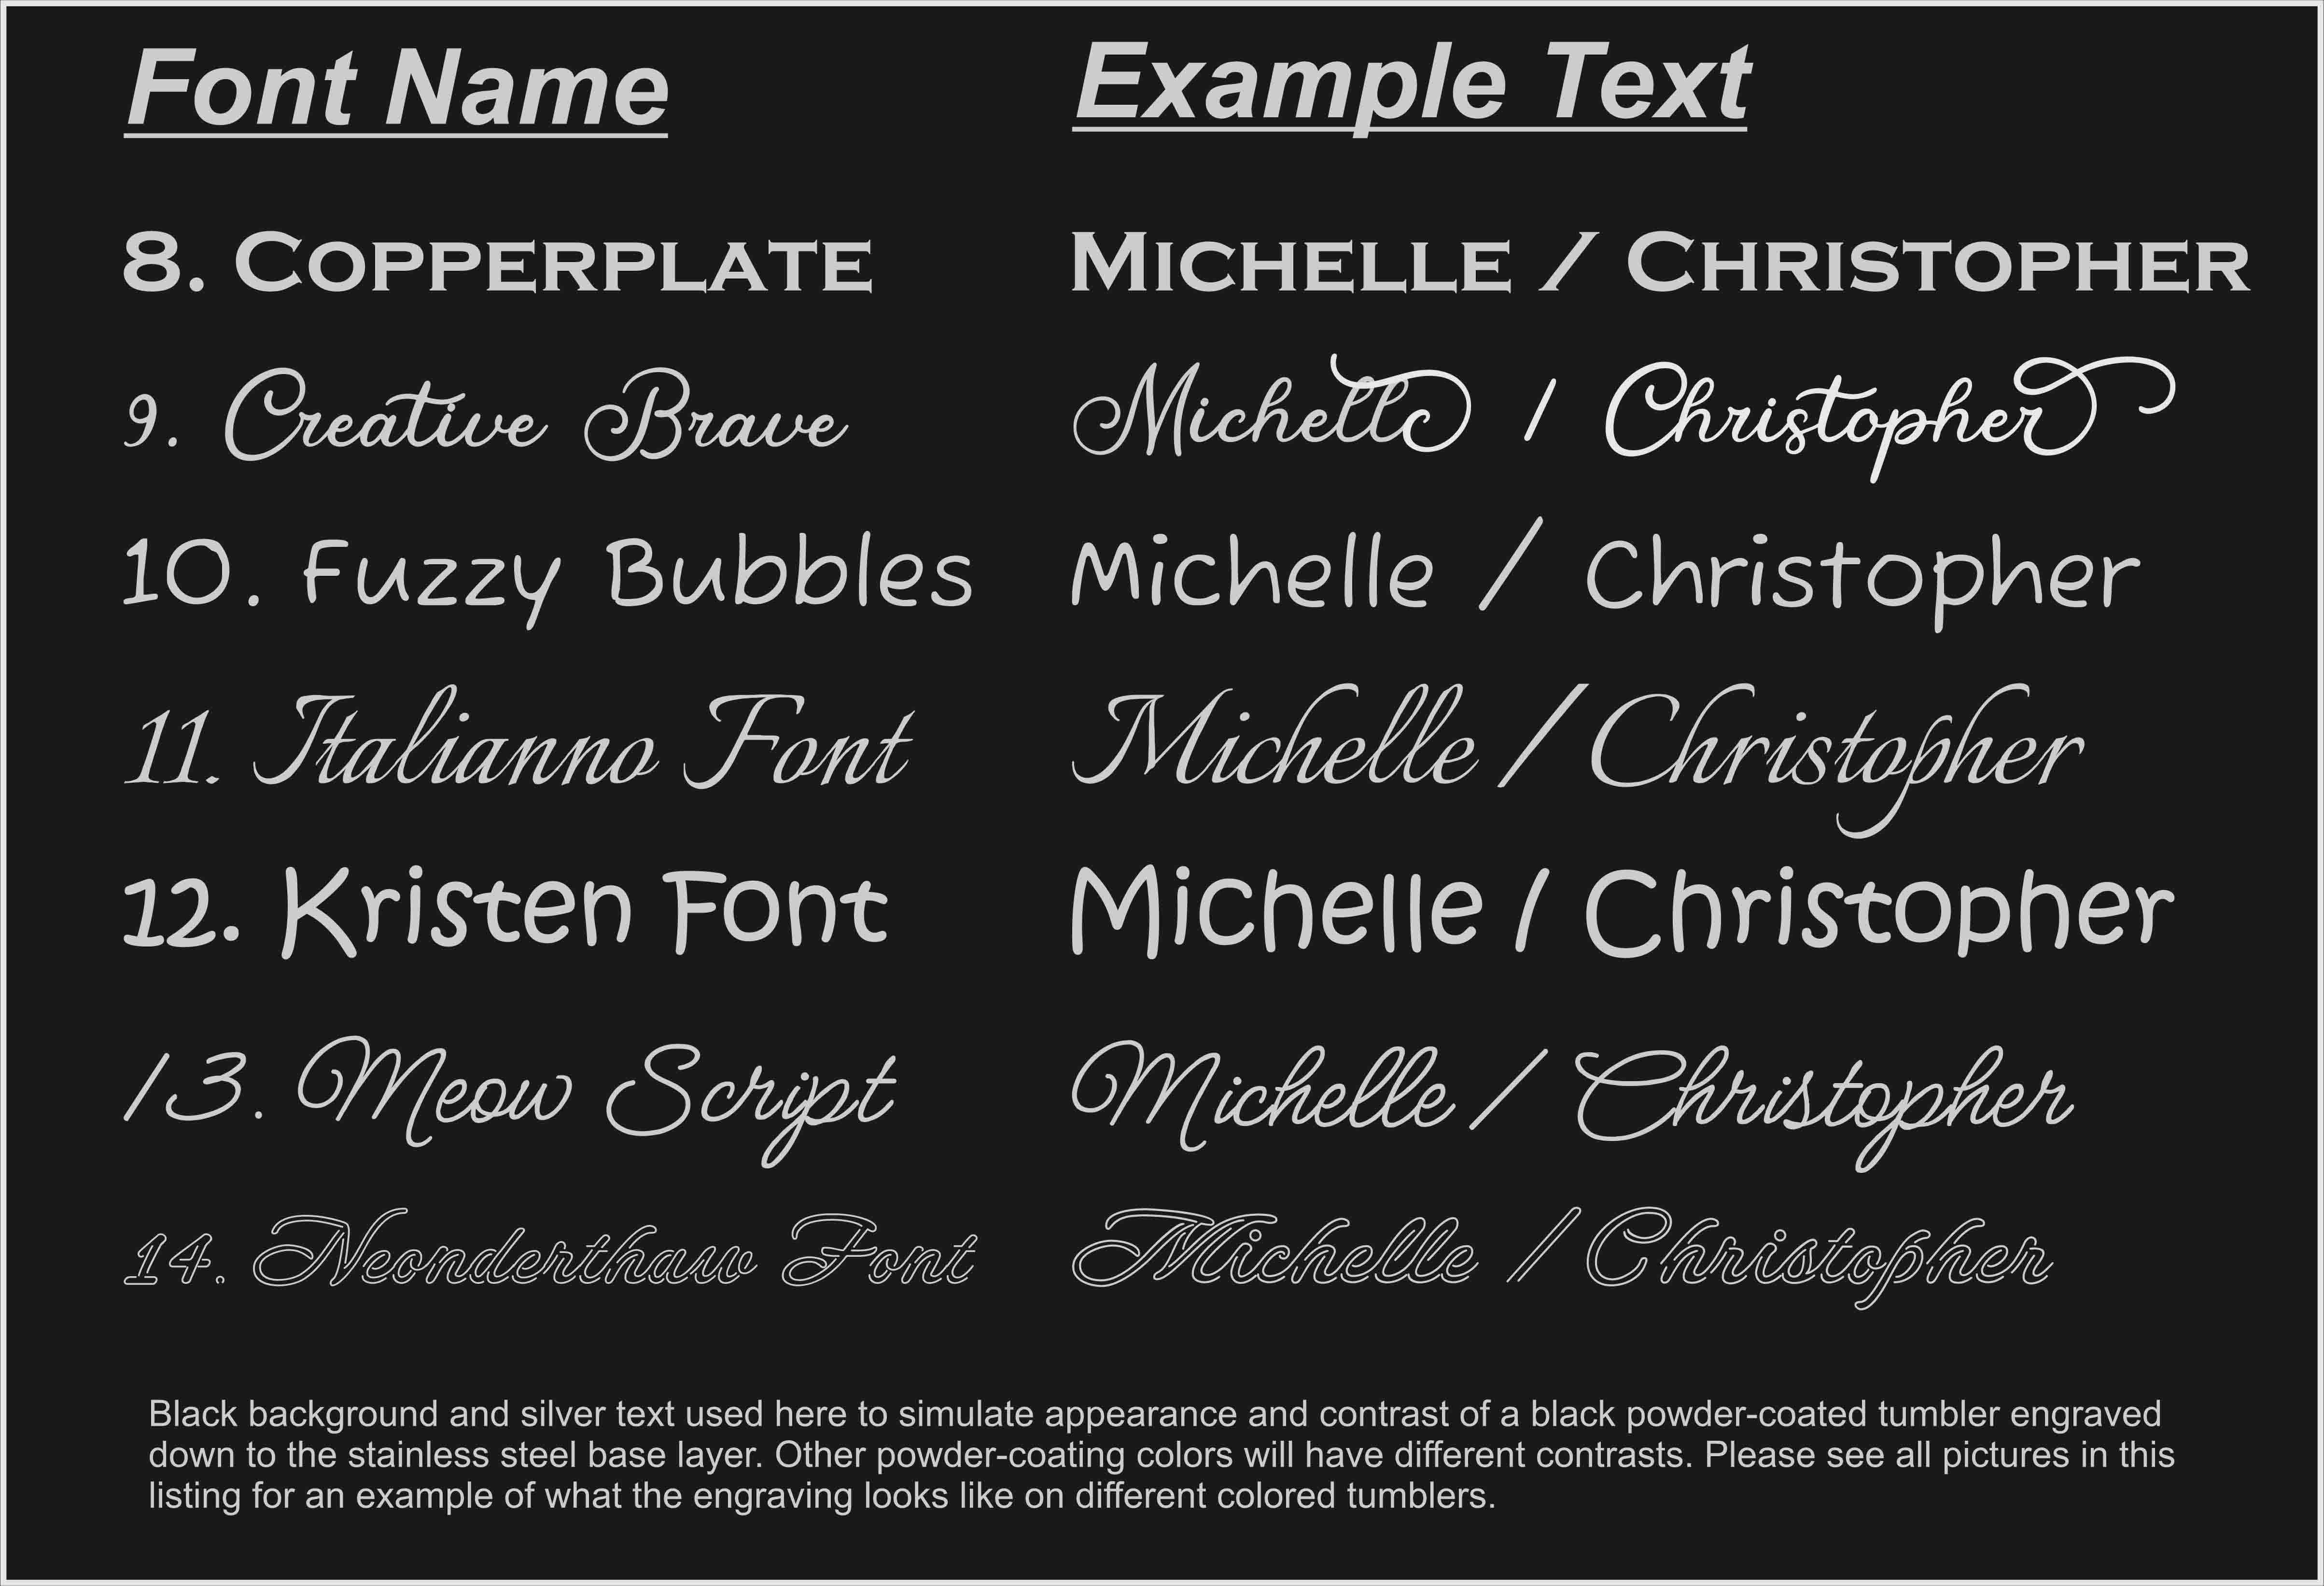 Fonts available for personalization.